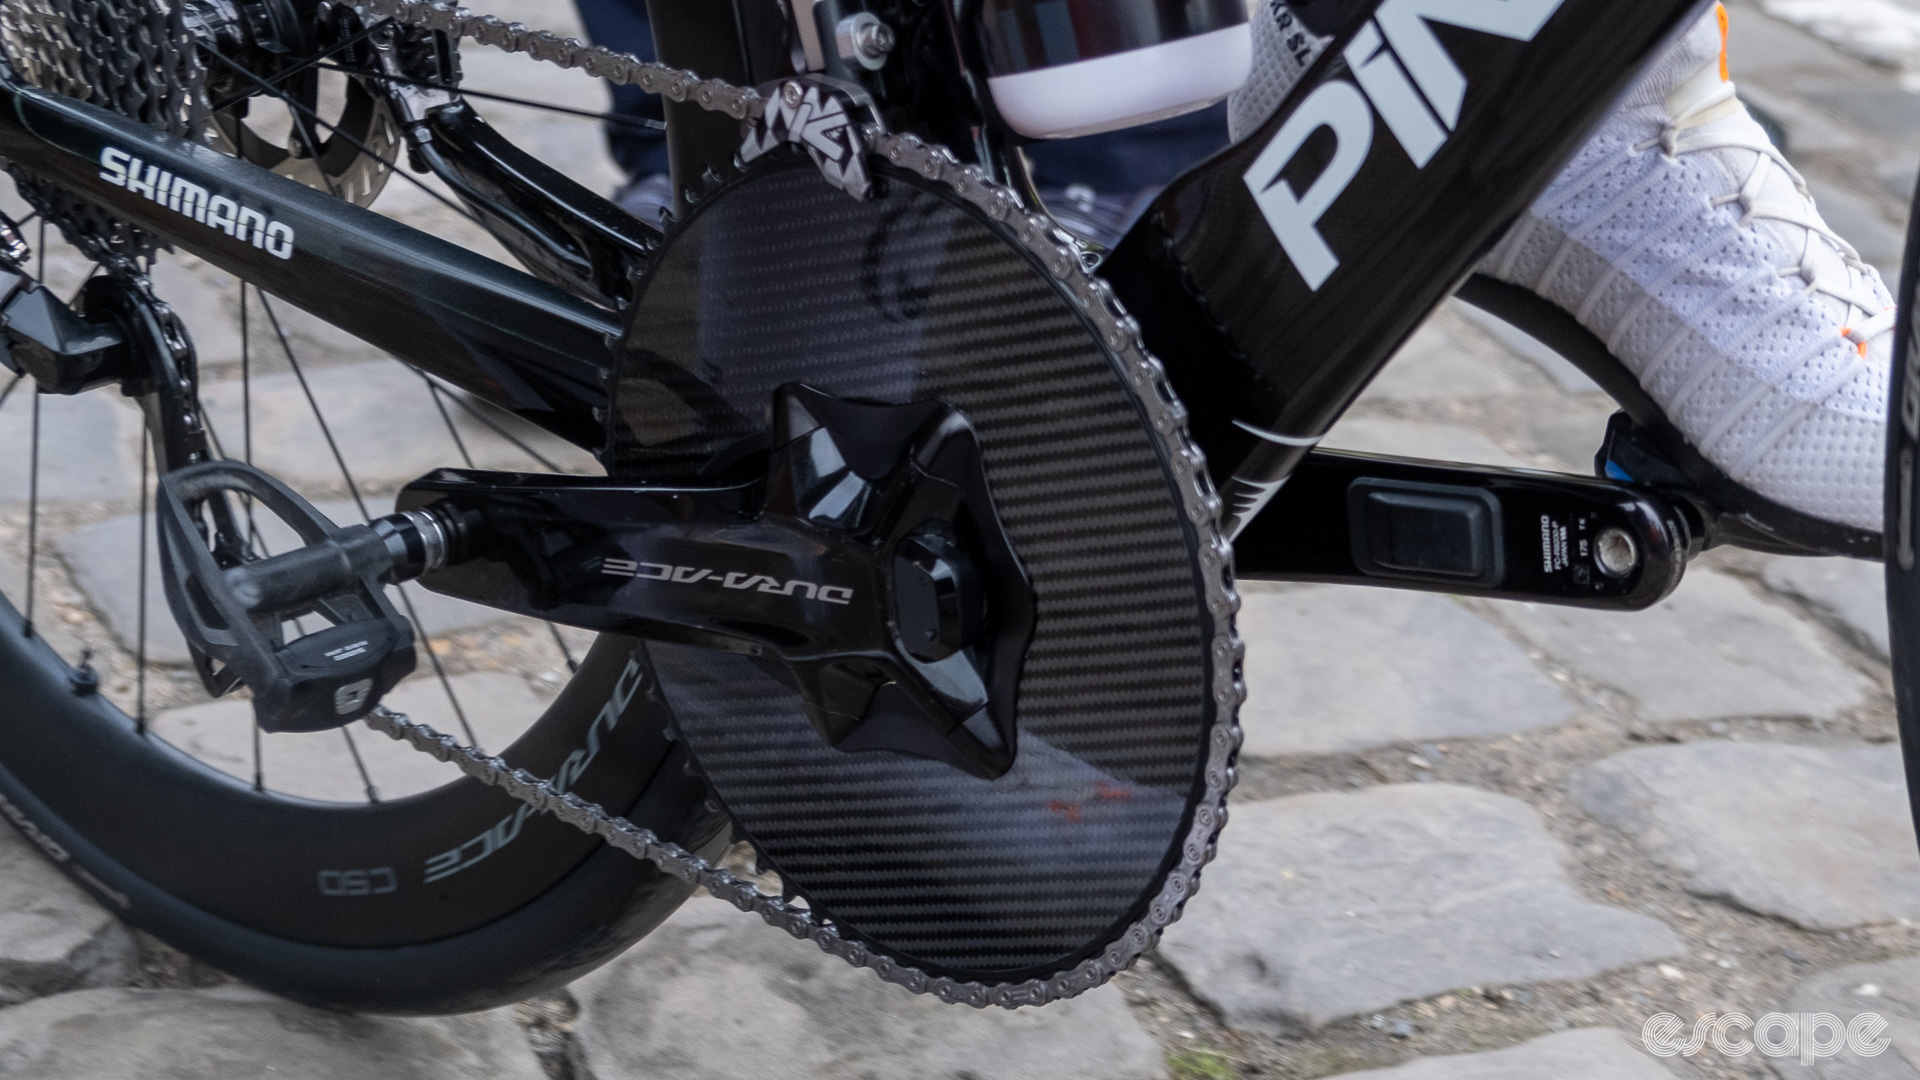 The image shows a 1X chainring